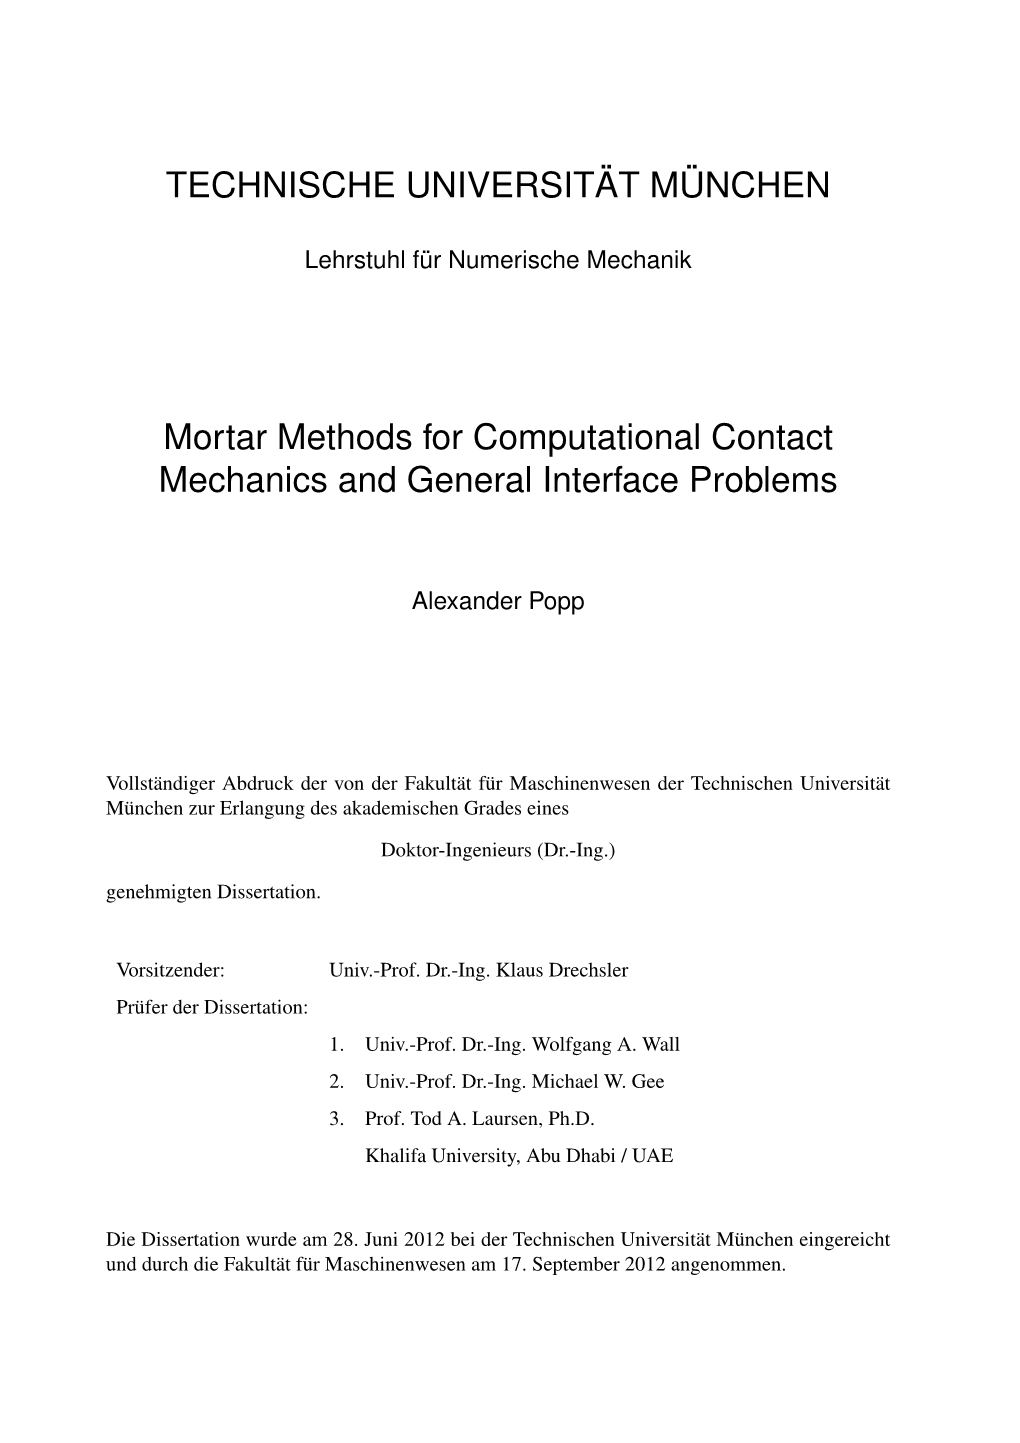 Mortar Methods for Computational Contact Mechanics and General Interface Problems